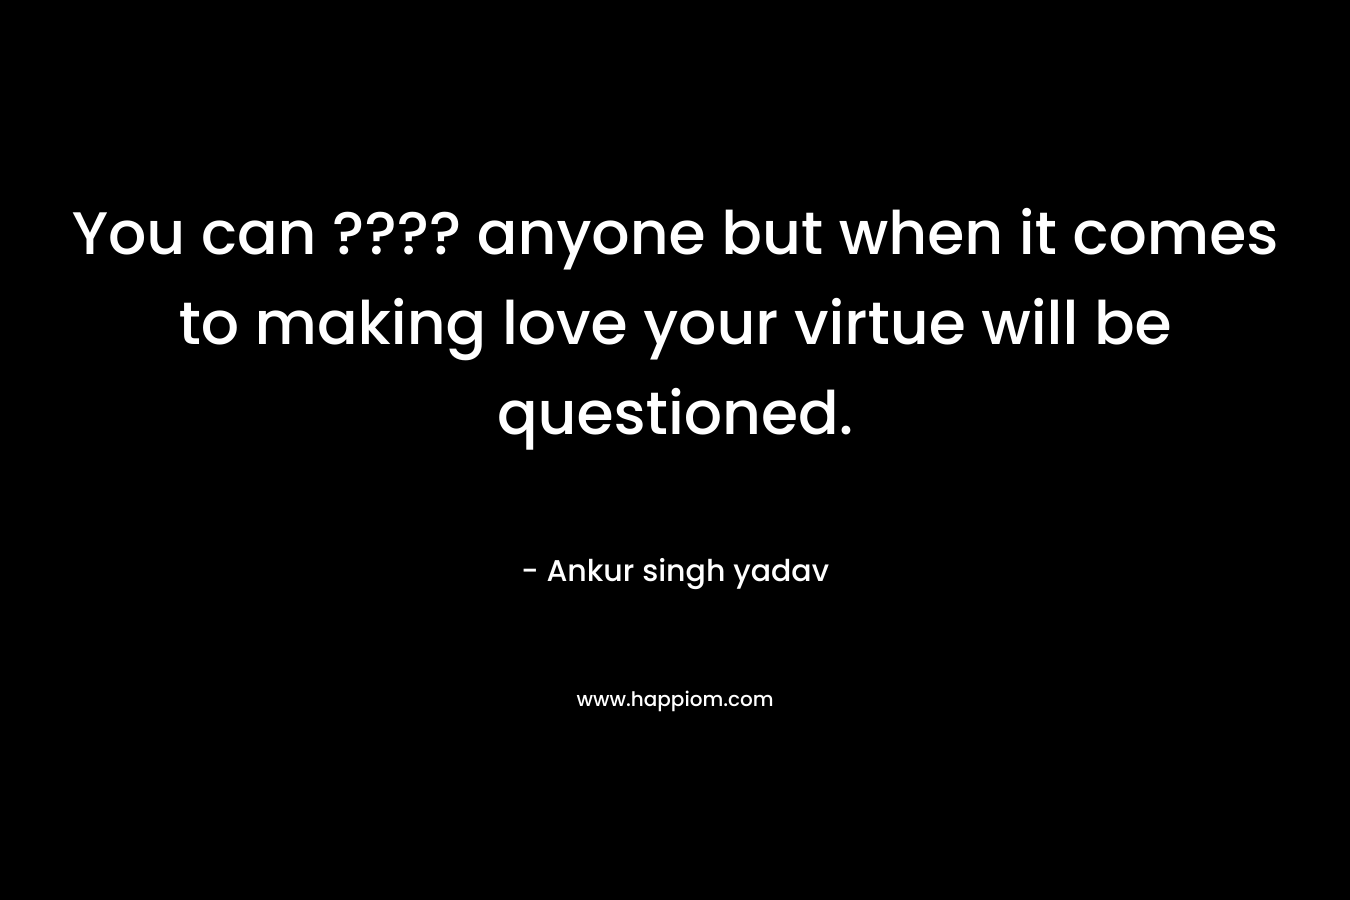 You can ???? anyone but when it comes to making love your virtue will be questioned.